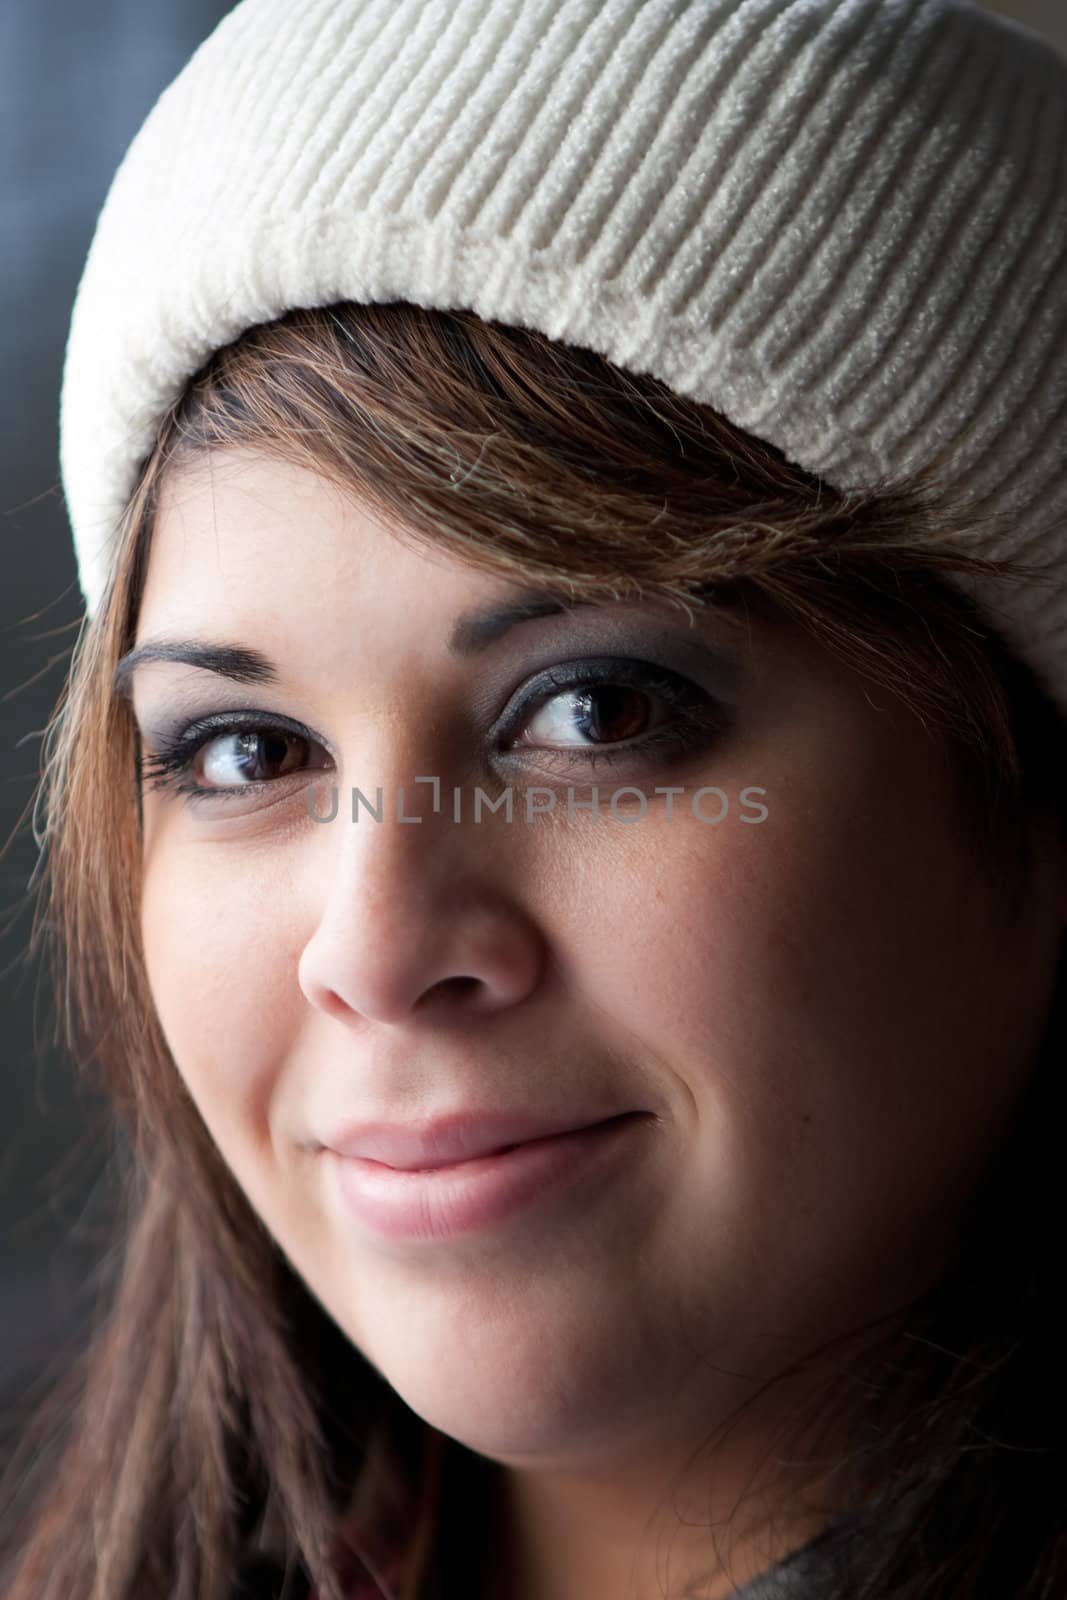 A Hispanic brunette woman with a friendly smile on her face wearing a knit cap on her head.